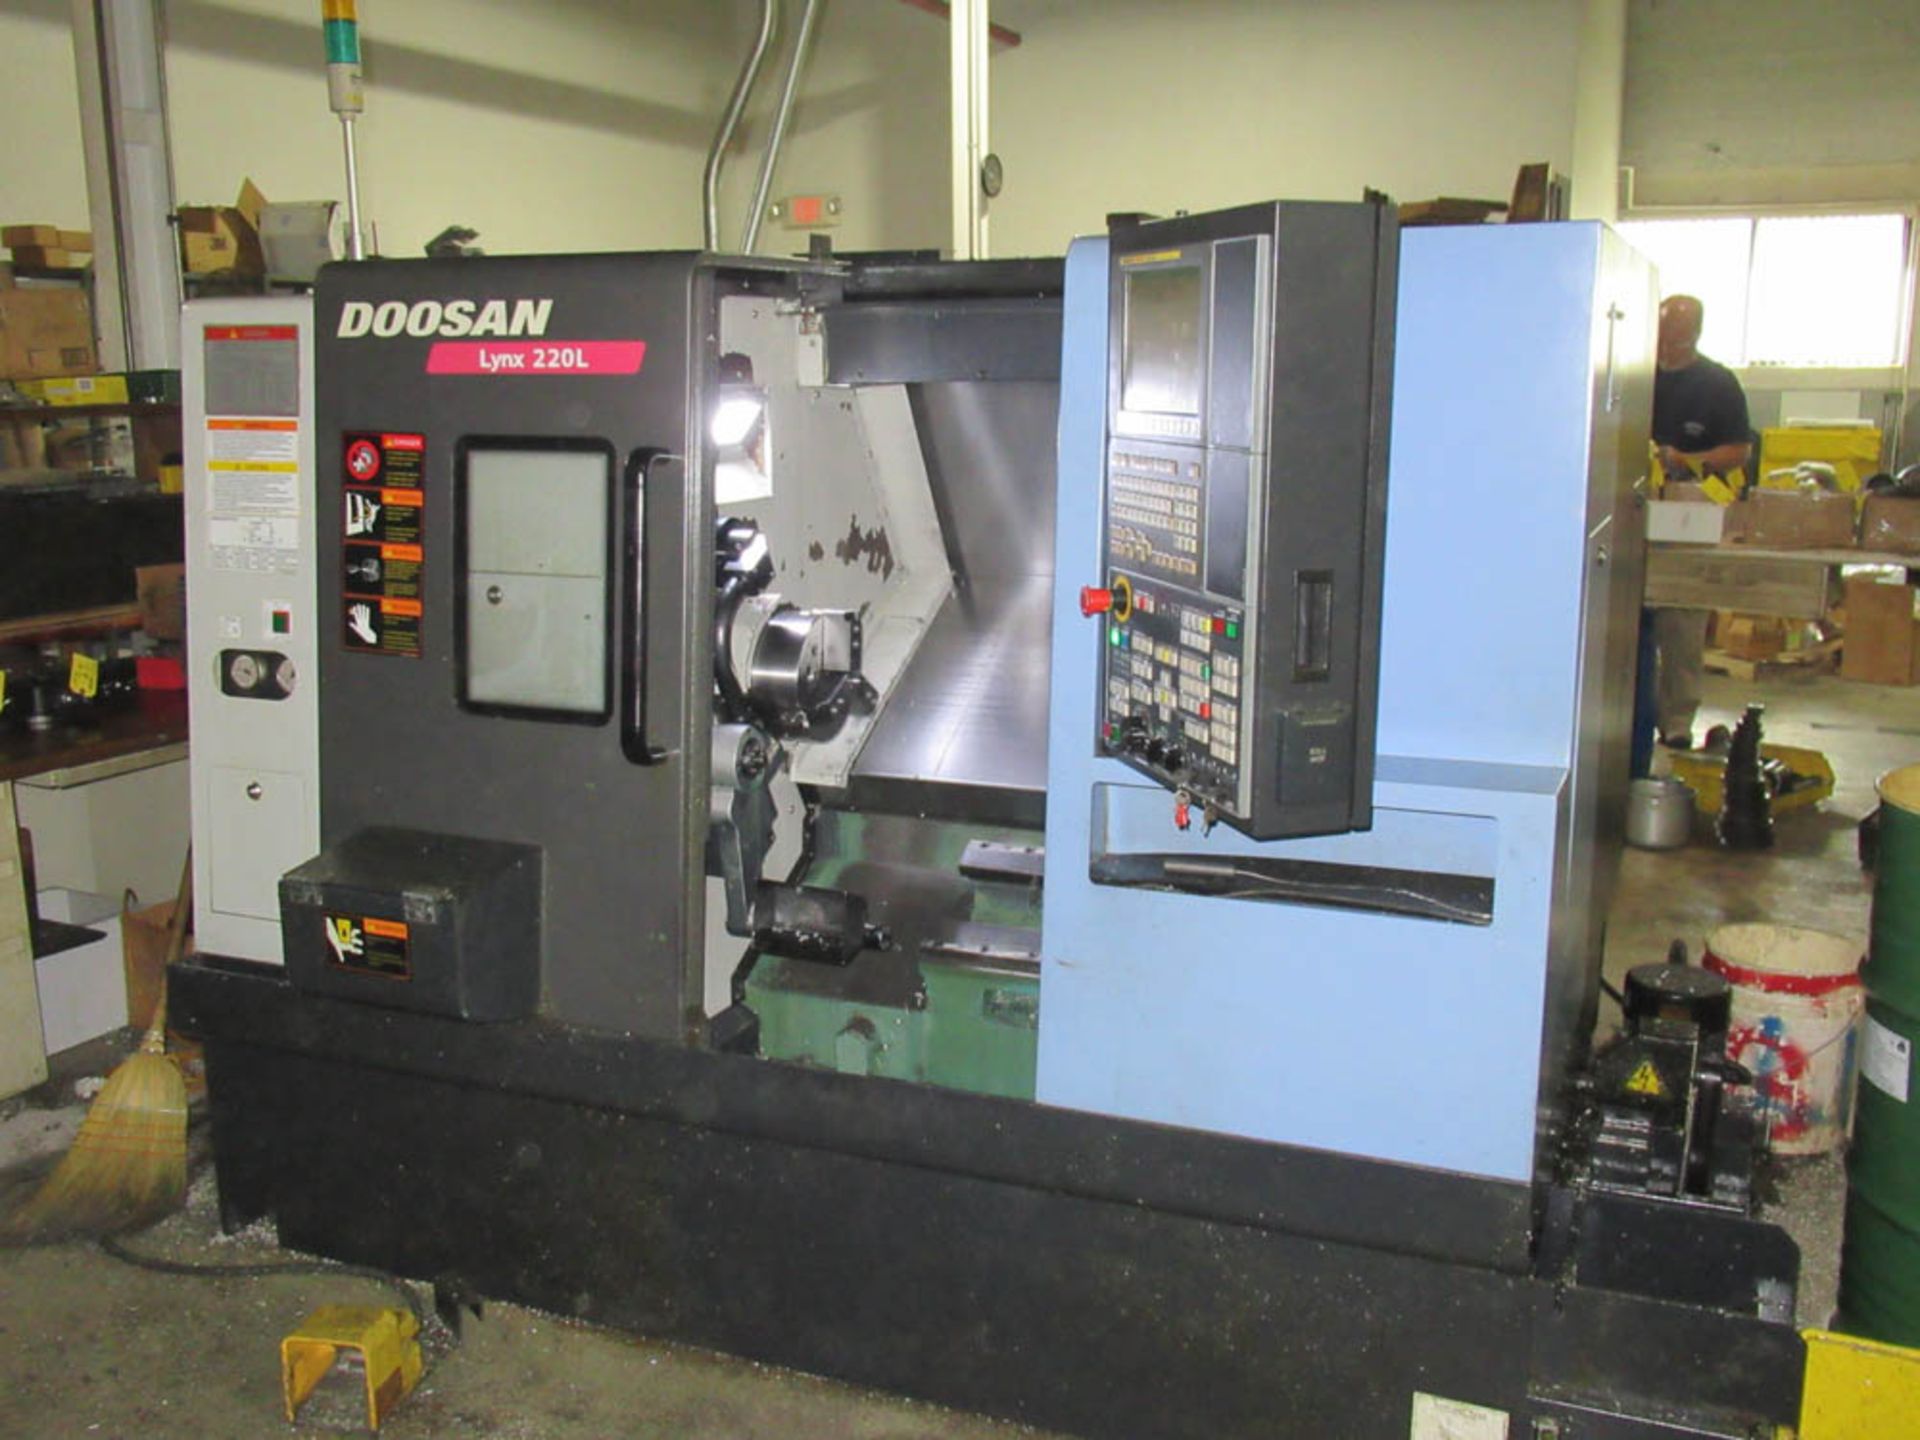 2015 DOOSAN LYNX 220LC CNC LATHE, 20" SWING OVER BED, 11.4" SWING OVER SADDLE, 12.59" MAX TURNING